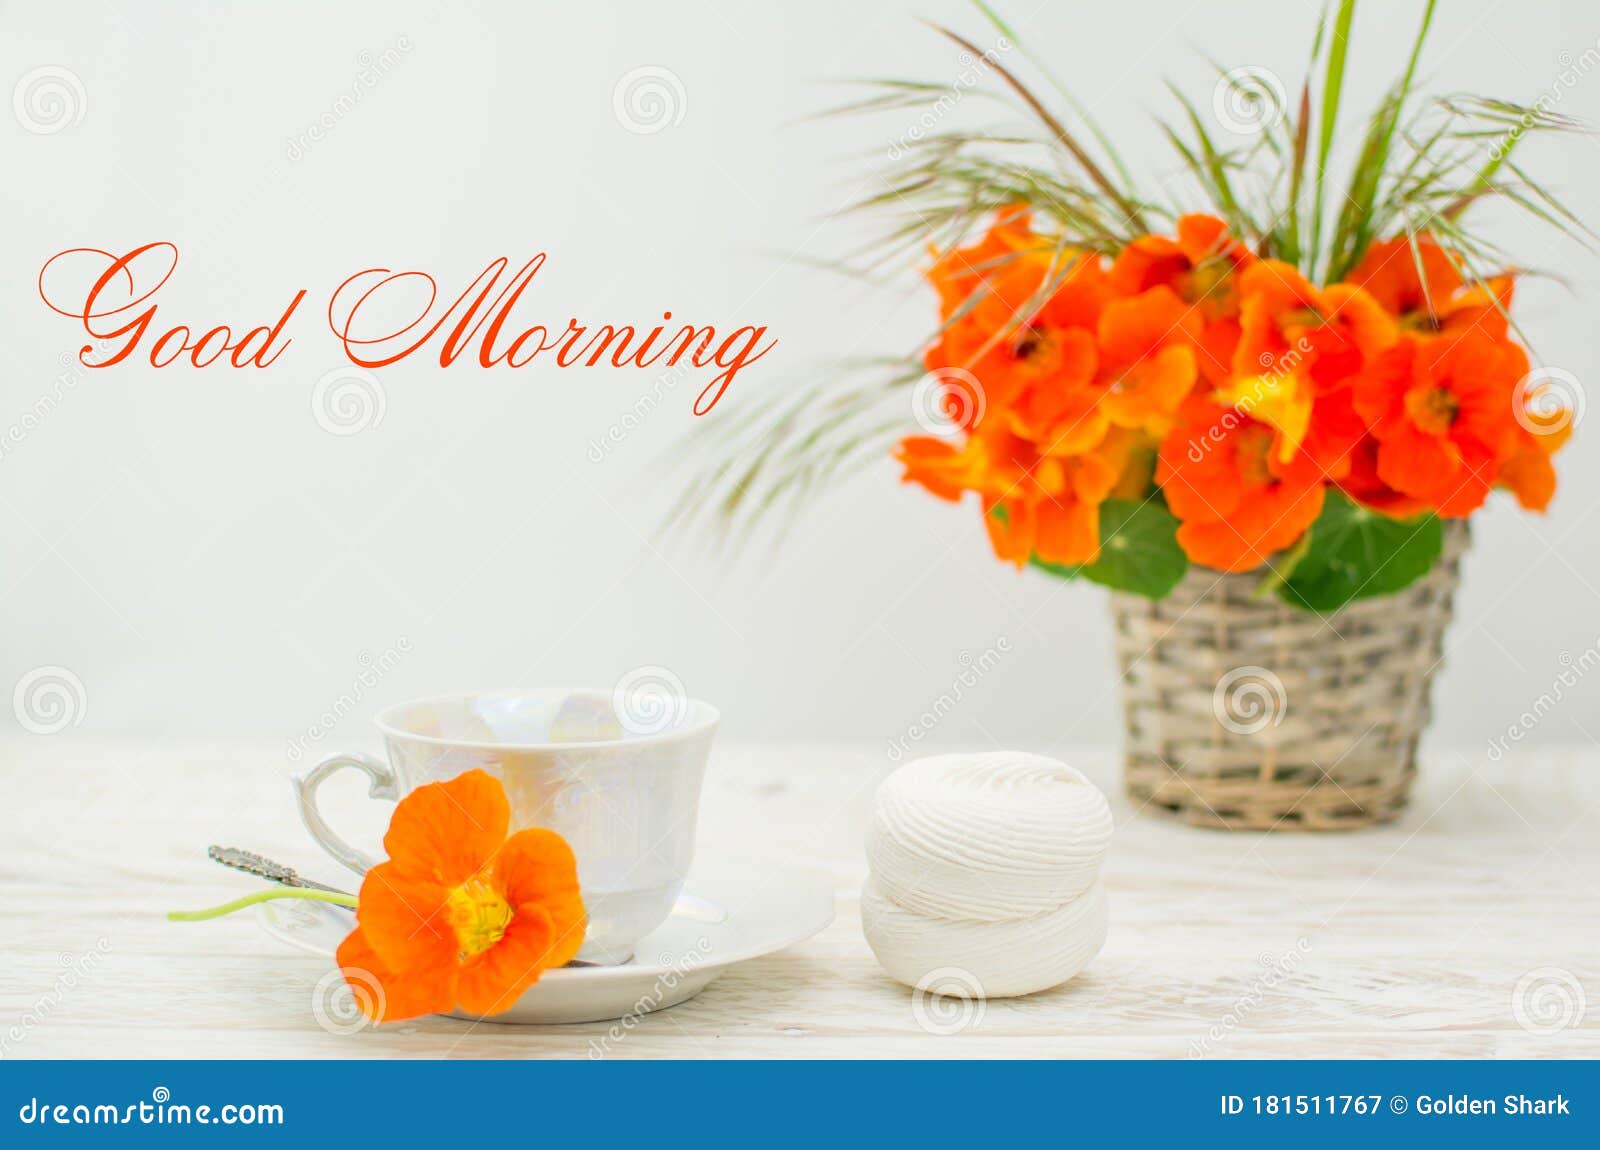 Good Morning Text Cup Of Coffee On Wooden Background And Nasturtium Edable Flowers Stock Image Image Of Sweet Decor 181511767